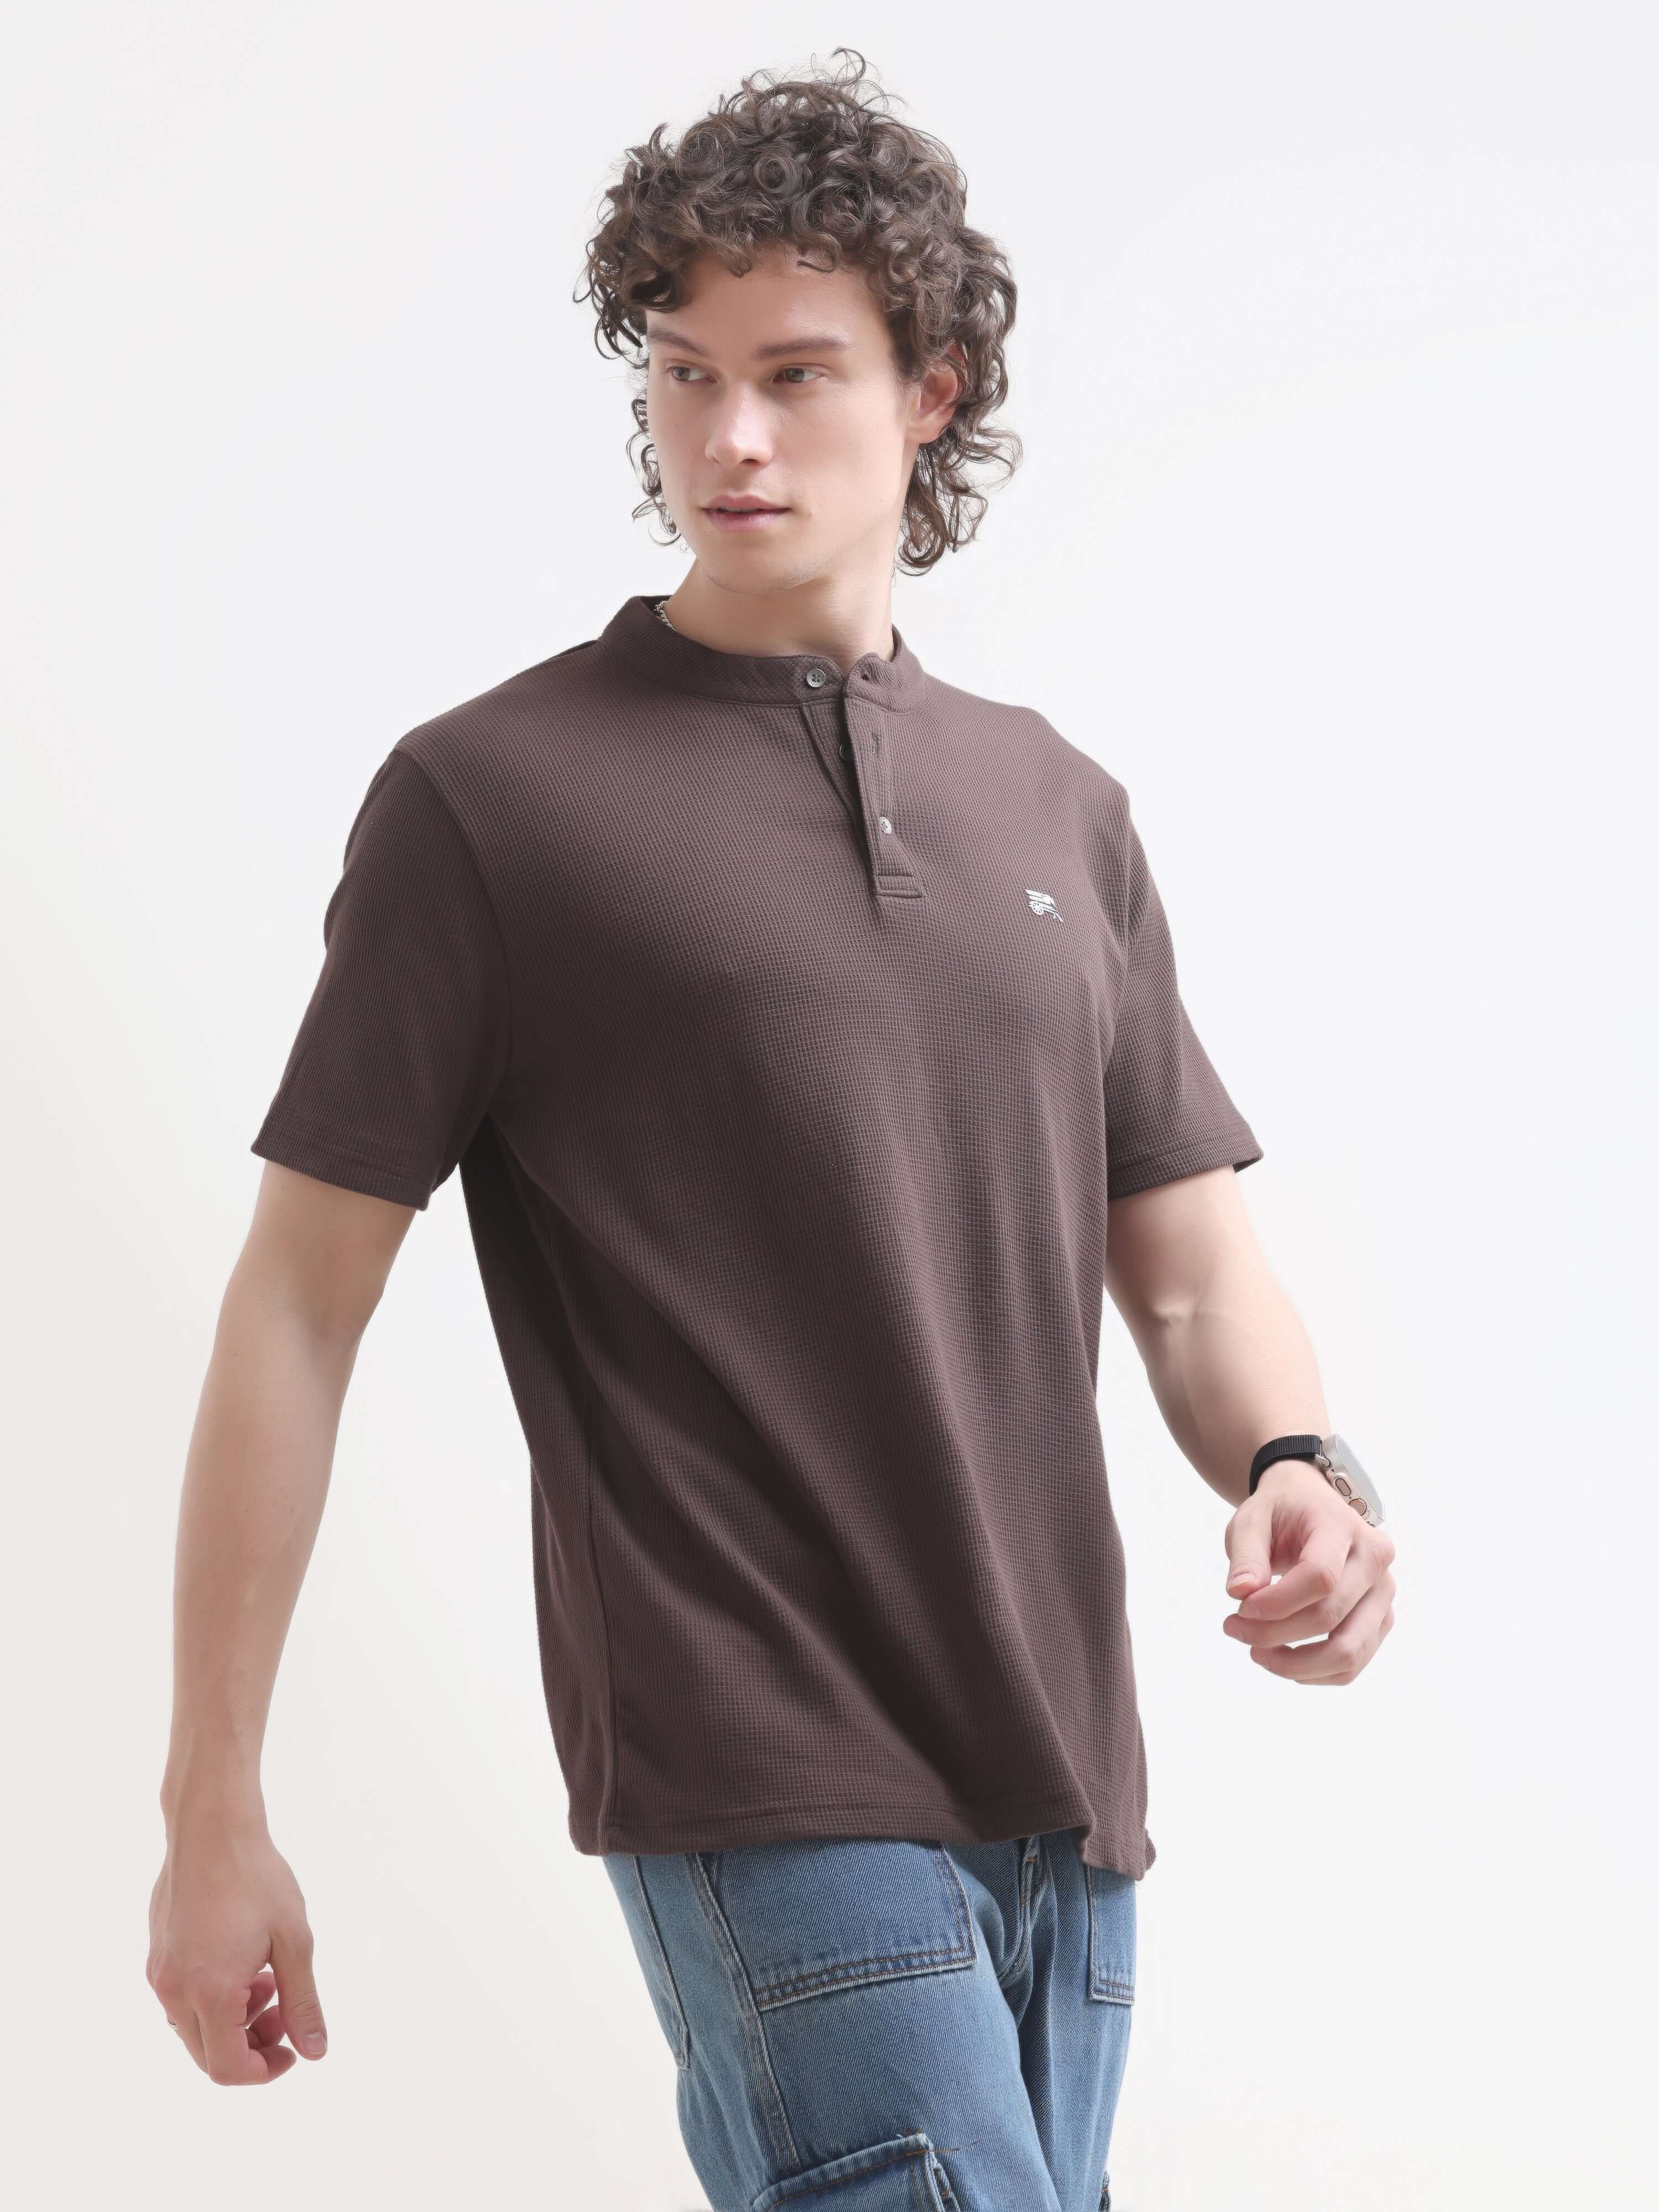 Pinnacle Brown Henley T-Shirt for Men - Shop Now shop online at Estilocus. Discover the comfort of our 100% Cotton Pinnacle Henley T-Shirt. Perfect for summer, it's a new arrival that complements any casual menswear. Shop today!